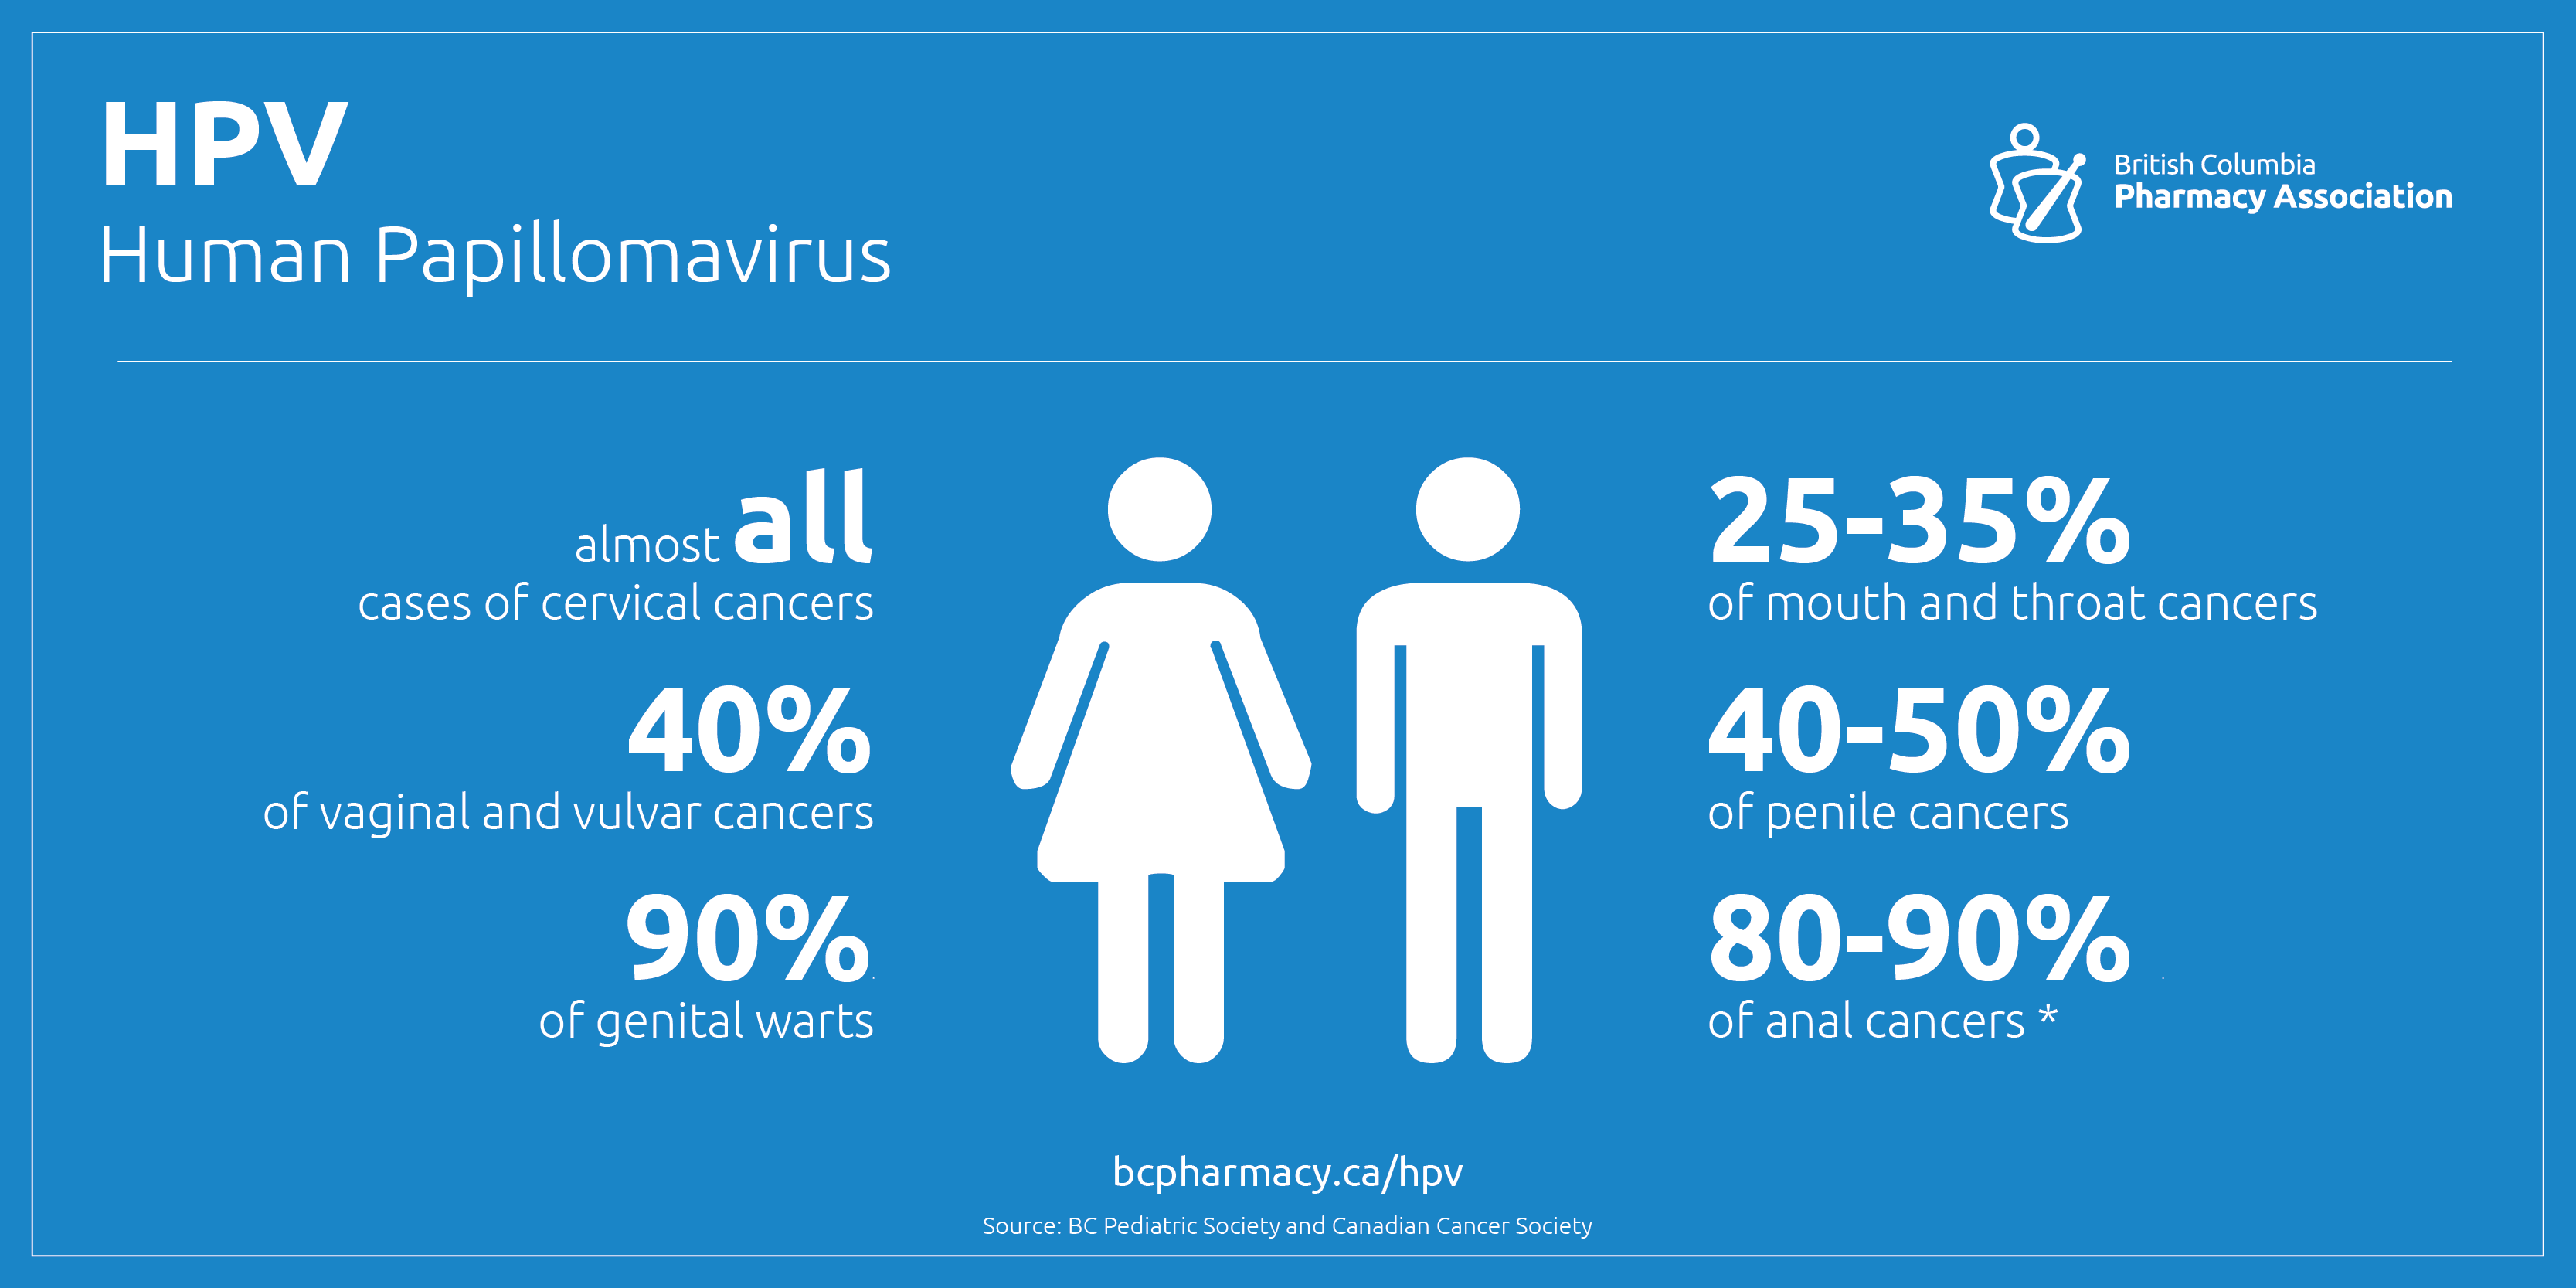 HPV can affect your life.